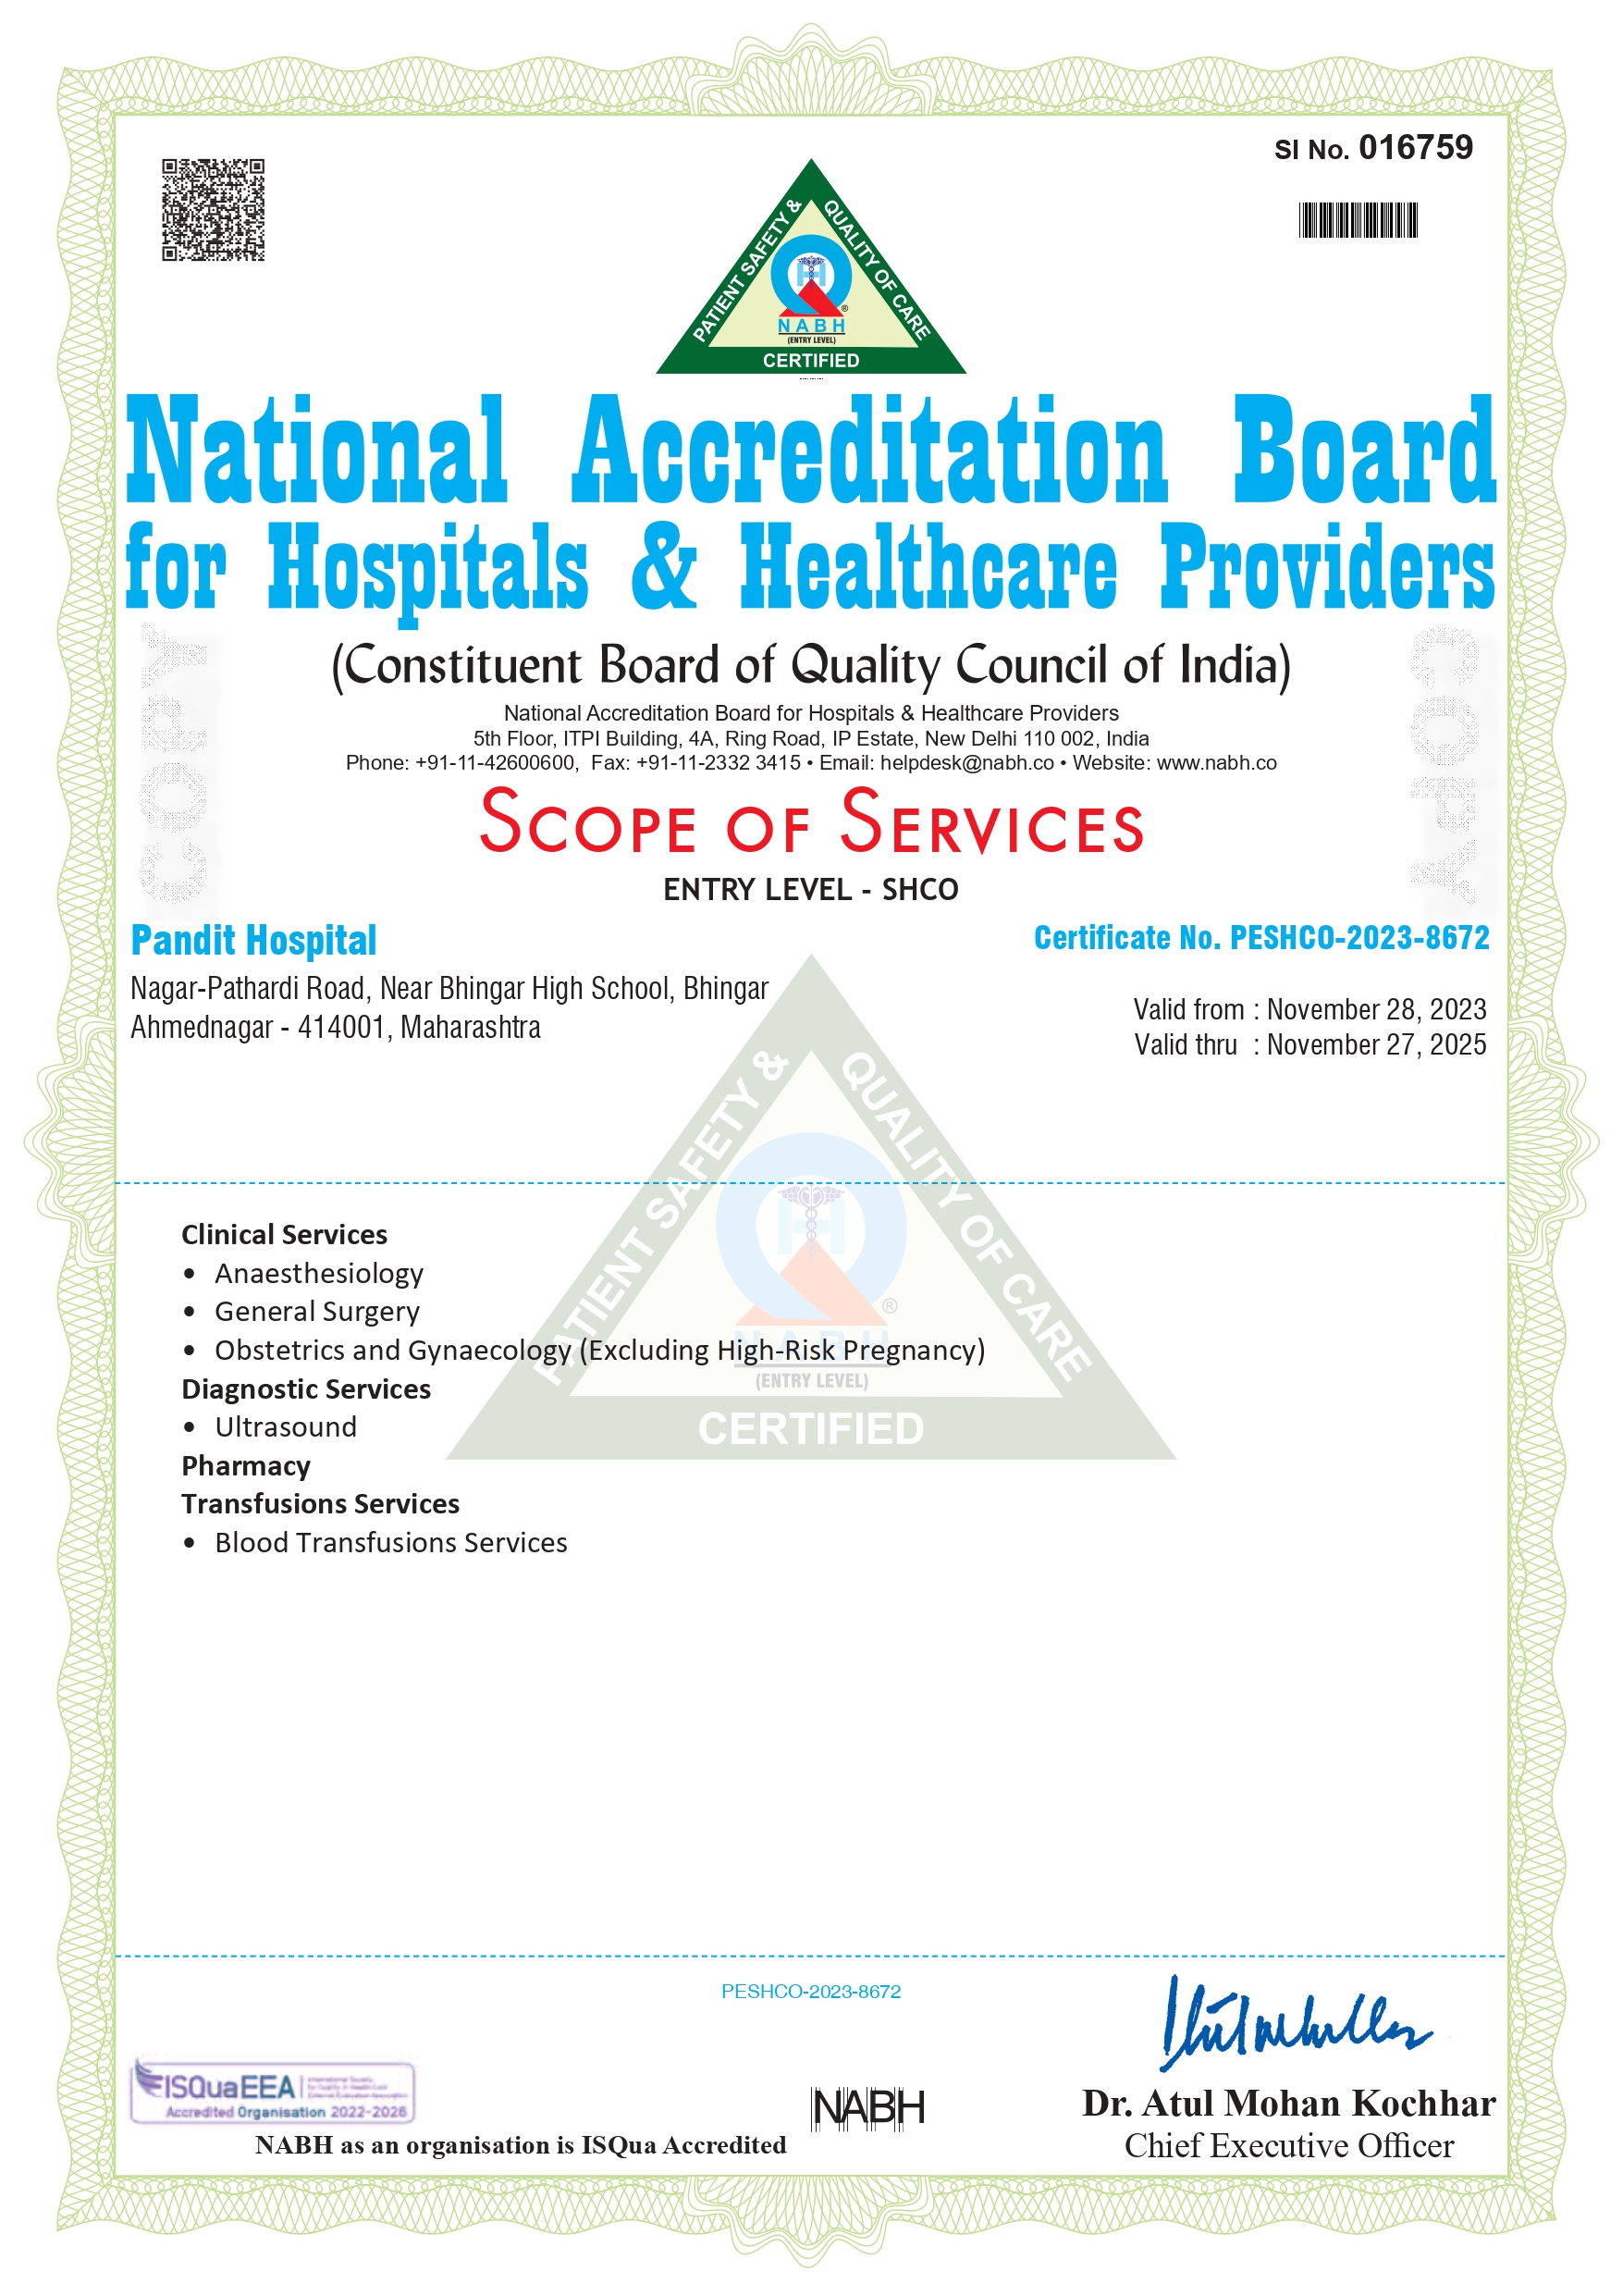 Pandit Hospital is now NABH accredited